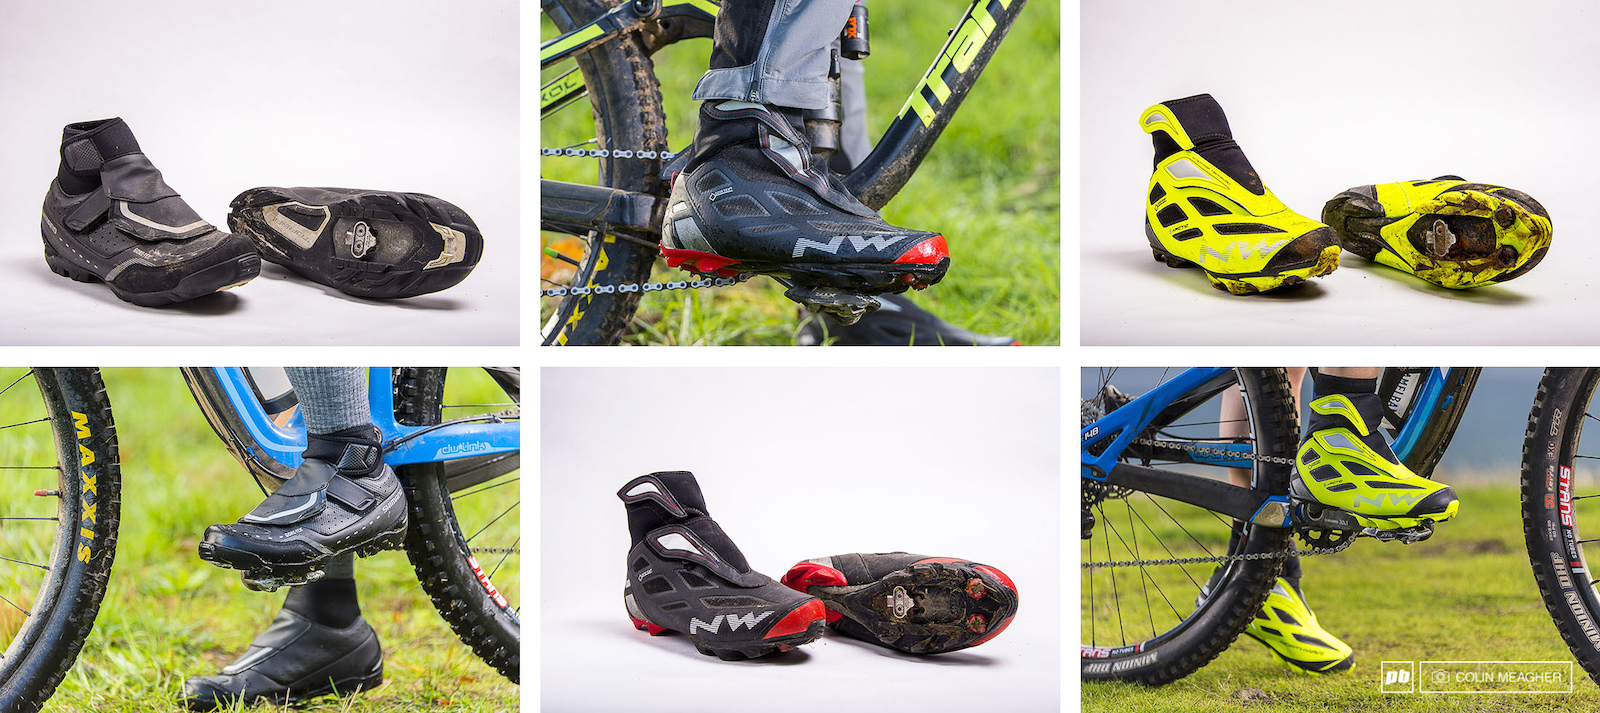 The Shimano SH-MW7, The Northwave Celsius2 GTX Winter MTB Boot, and the Northwave Arctic Celsius2 GTX Winter MTB Boot are just the tip of the iceberg when it comes to specialty winter shoes.